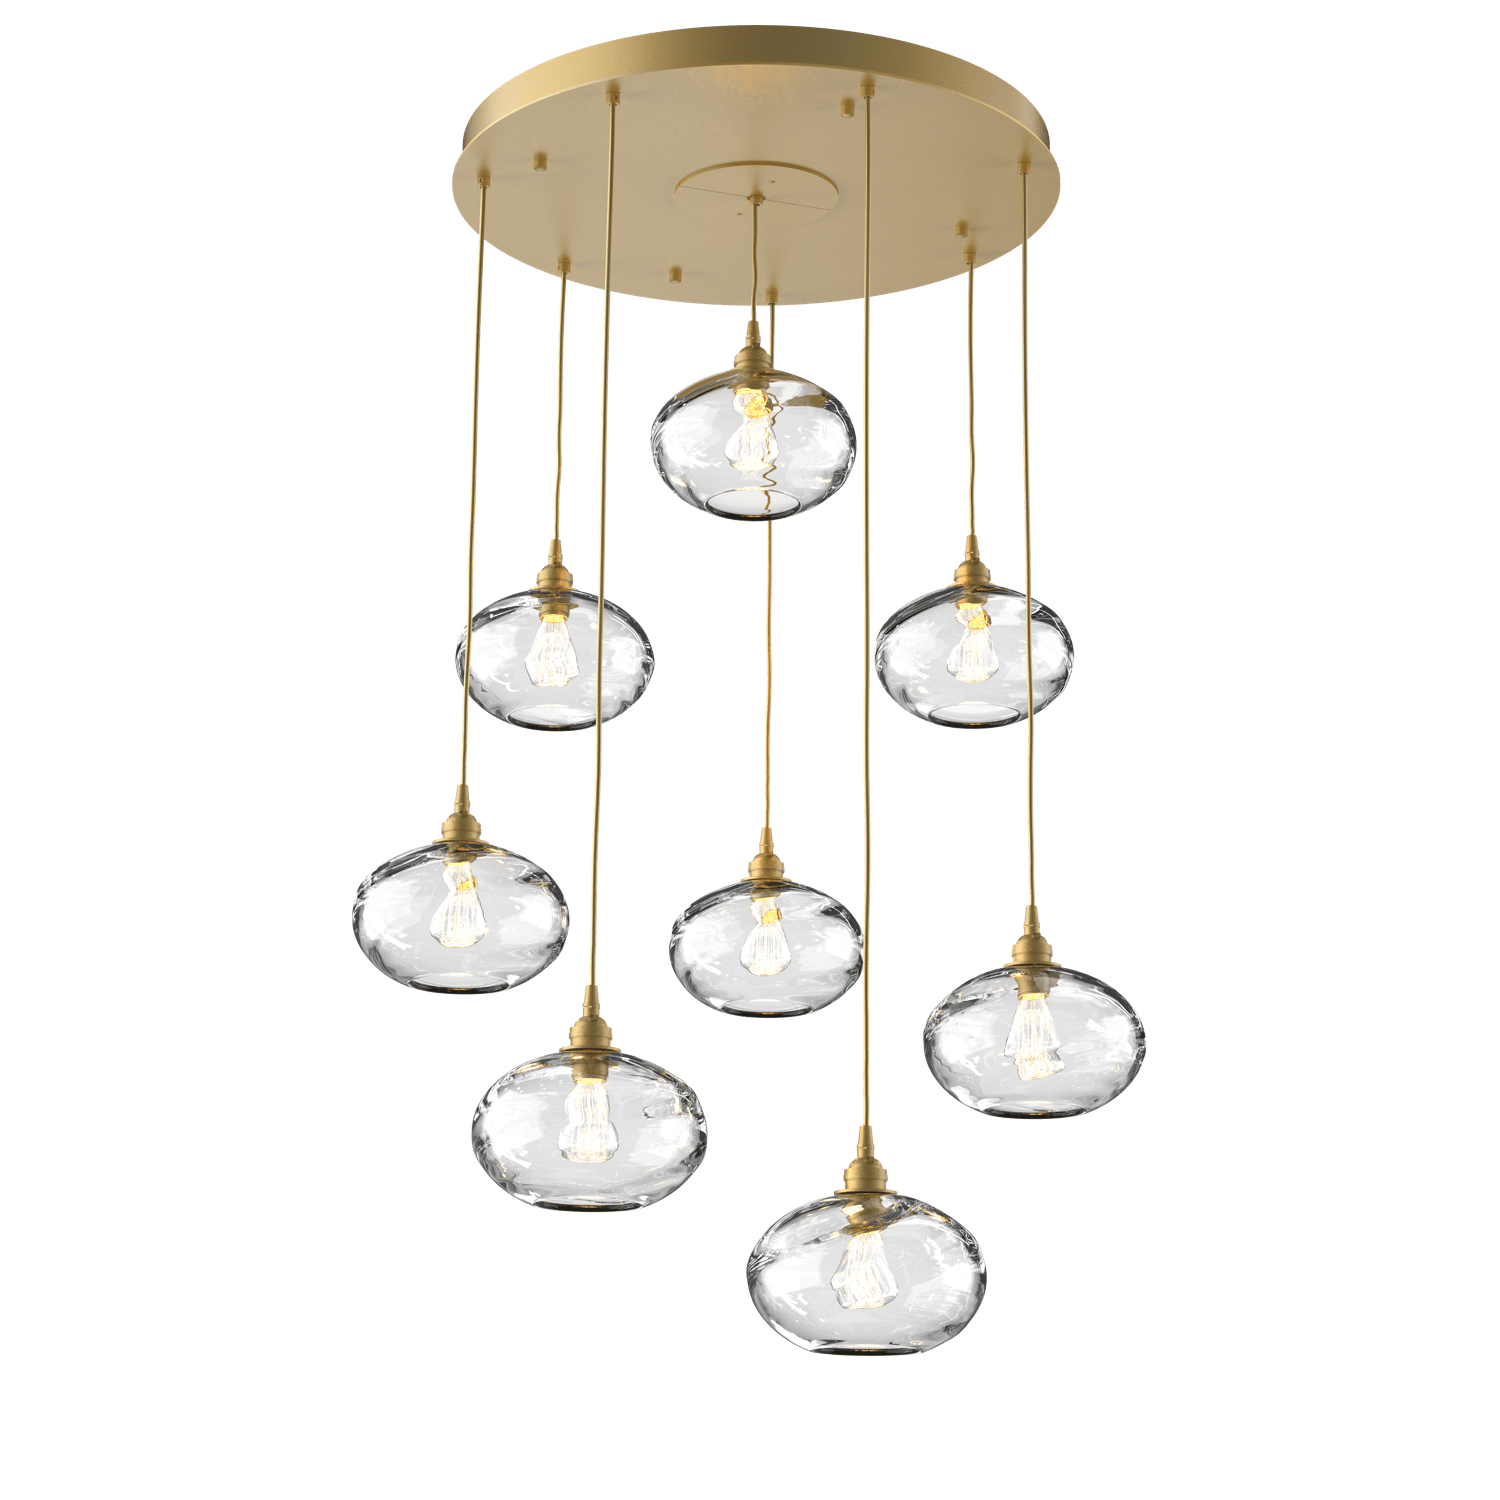 CHB0036-08-GB-OC-Hammerton-Studio-Optic-Blown-Glass-Coppa-8-light-round-pendant-chandelier-with-gilded-brass-finish-and-optic-clear-blown-glass-shades-and-incandescent-lamping